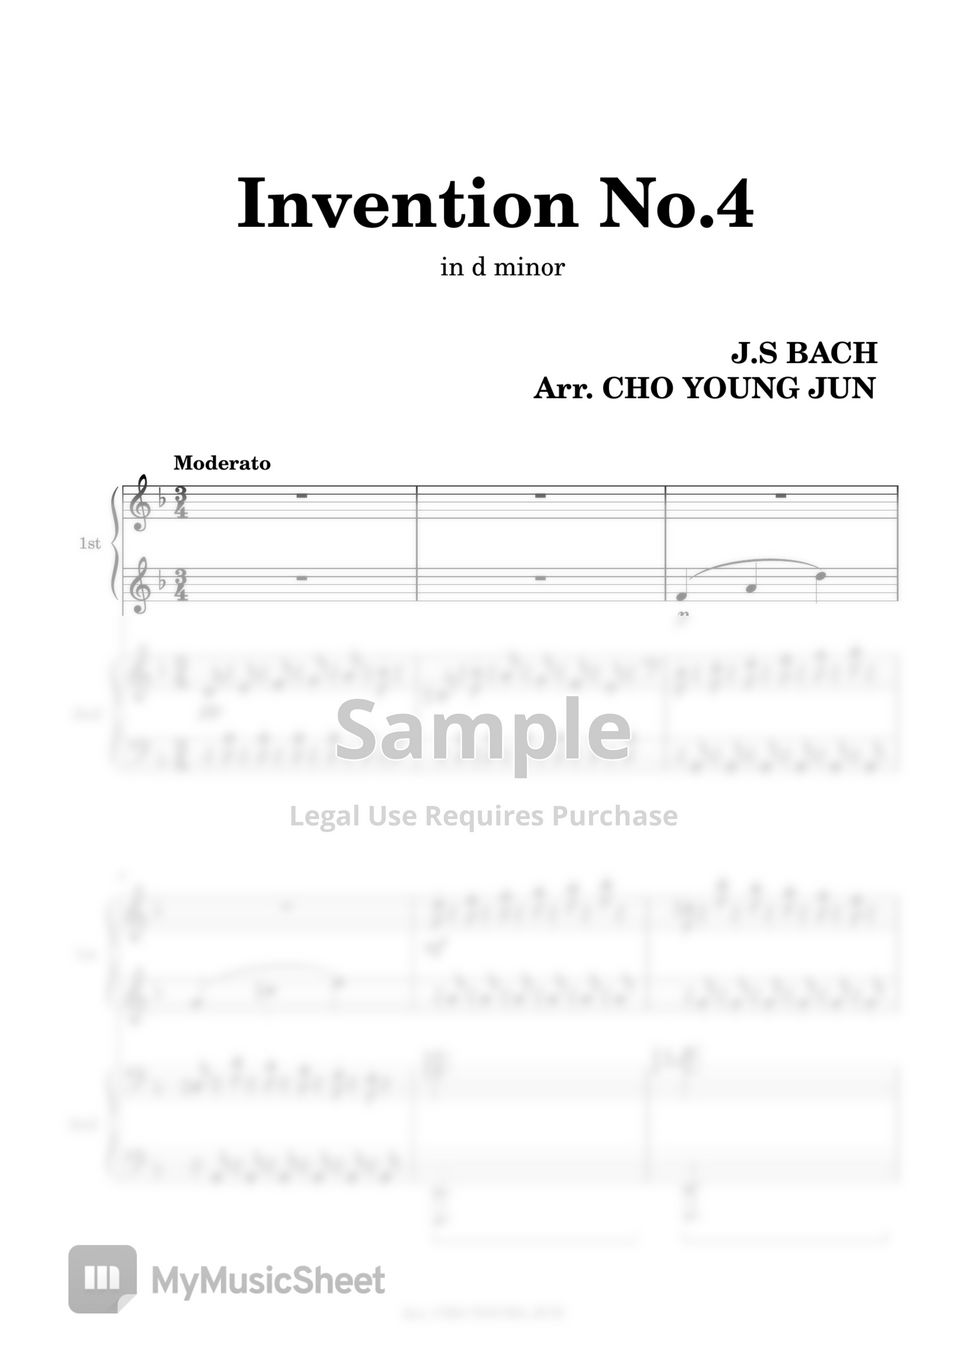 J.S Bach - J.S Bach Invention No.4 (J.S Bach Invention No.4 for 1Piano4Hands) by CHO YOUNG JUN